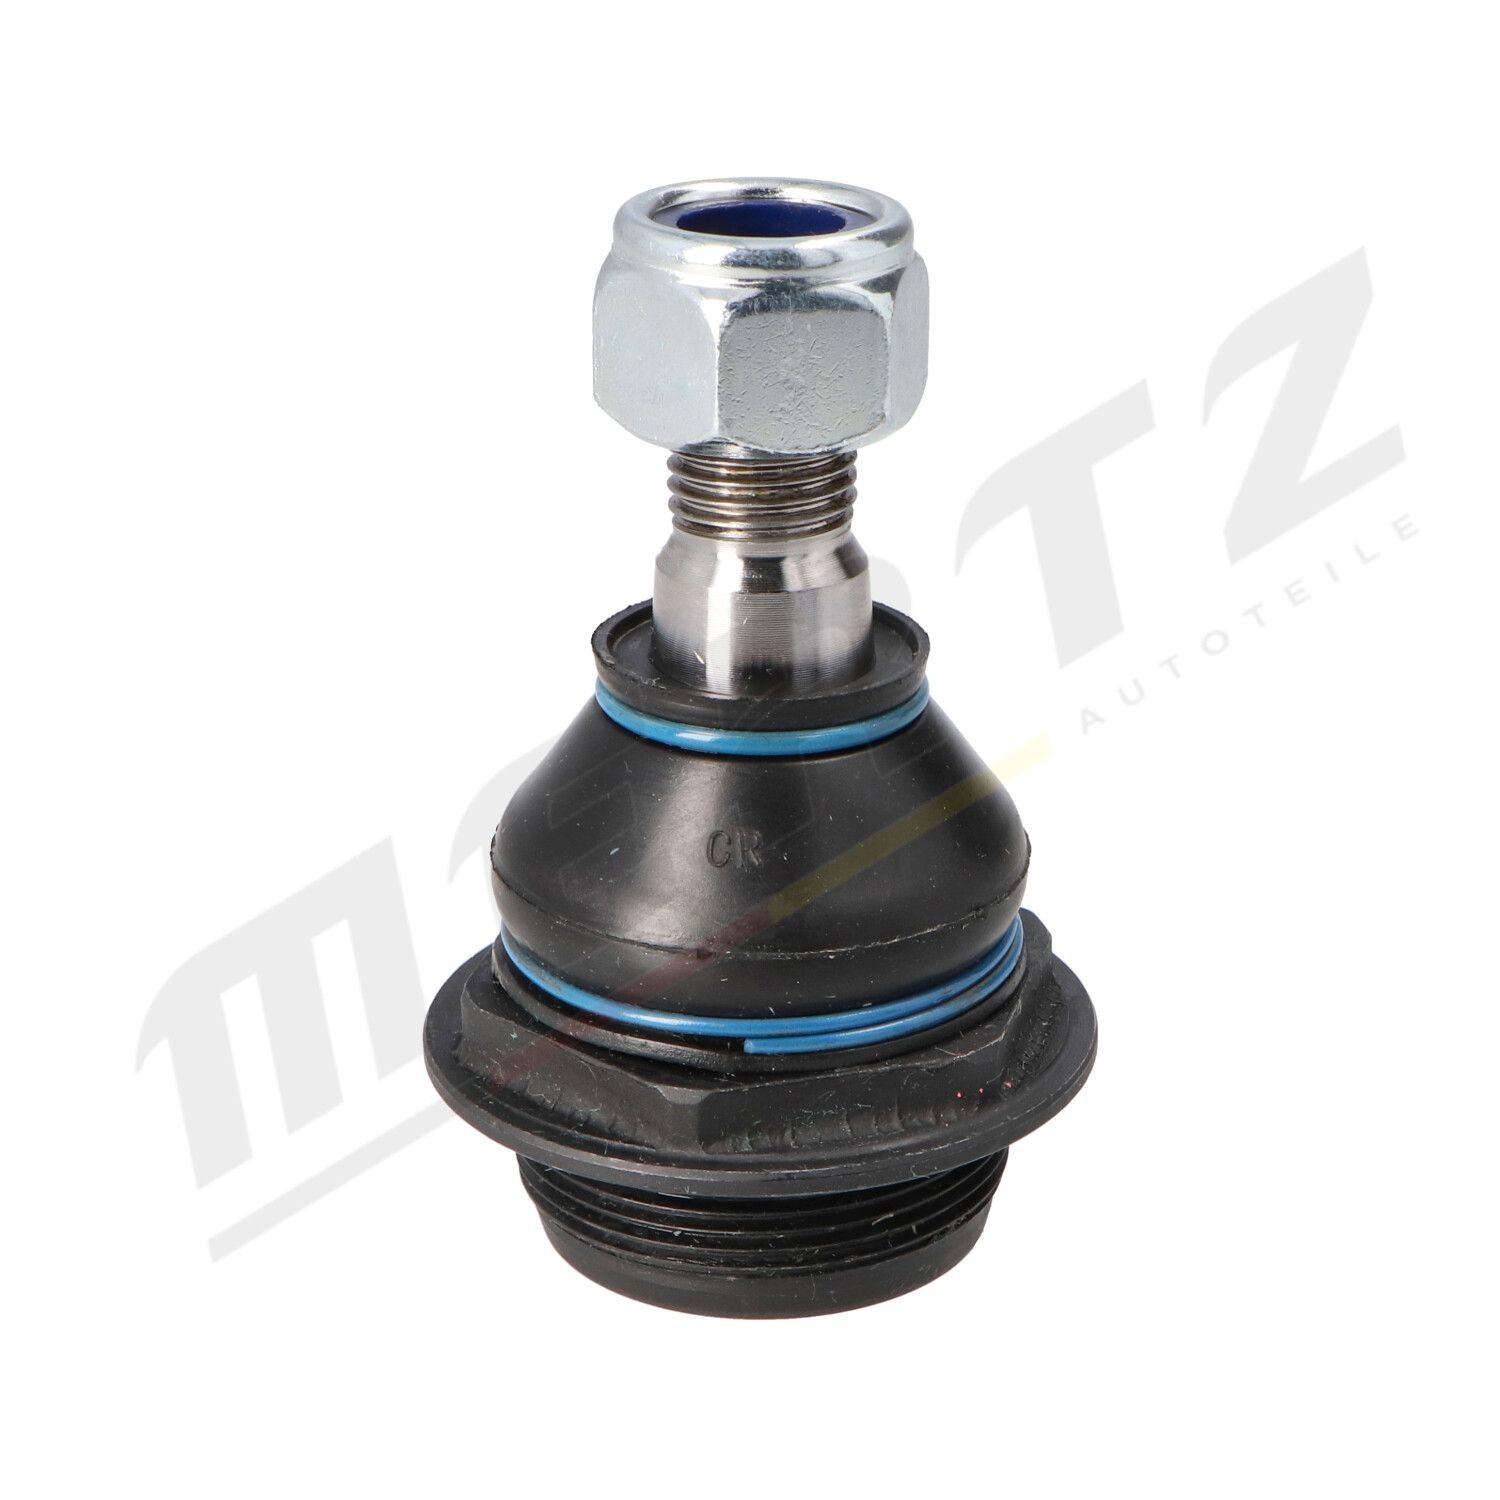 Ball joint MERTZ Front Axle Left, Front Axle Right, 51mm, 78mm, 51mm - M-S0400